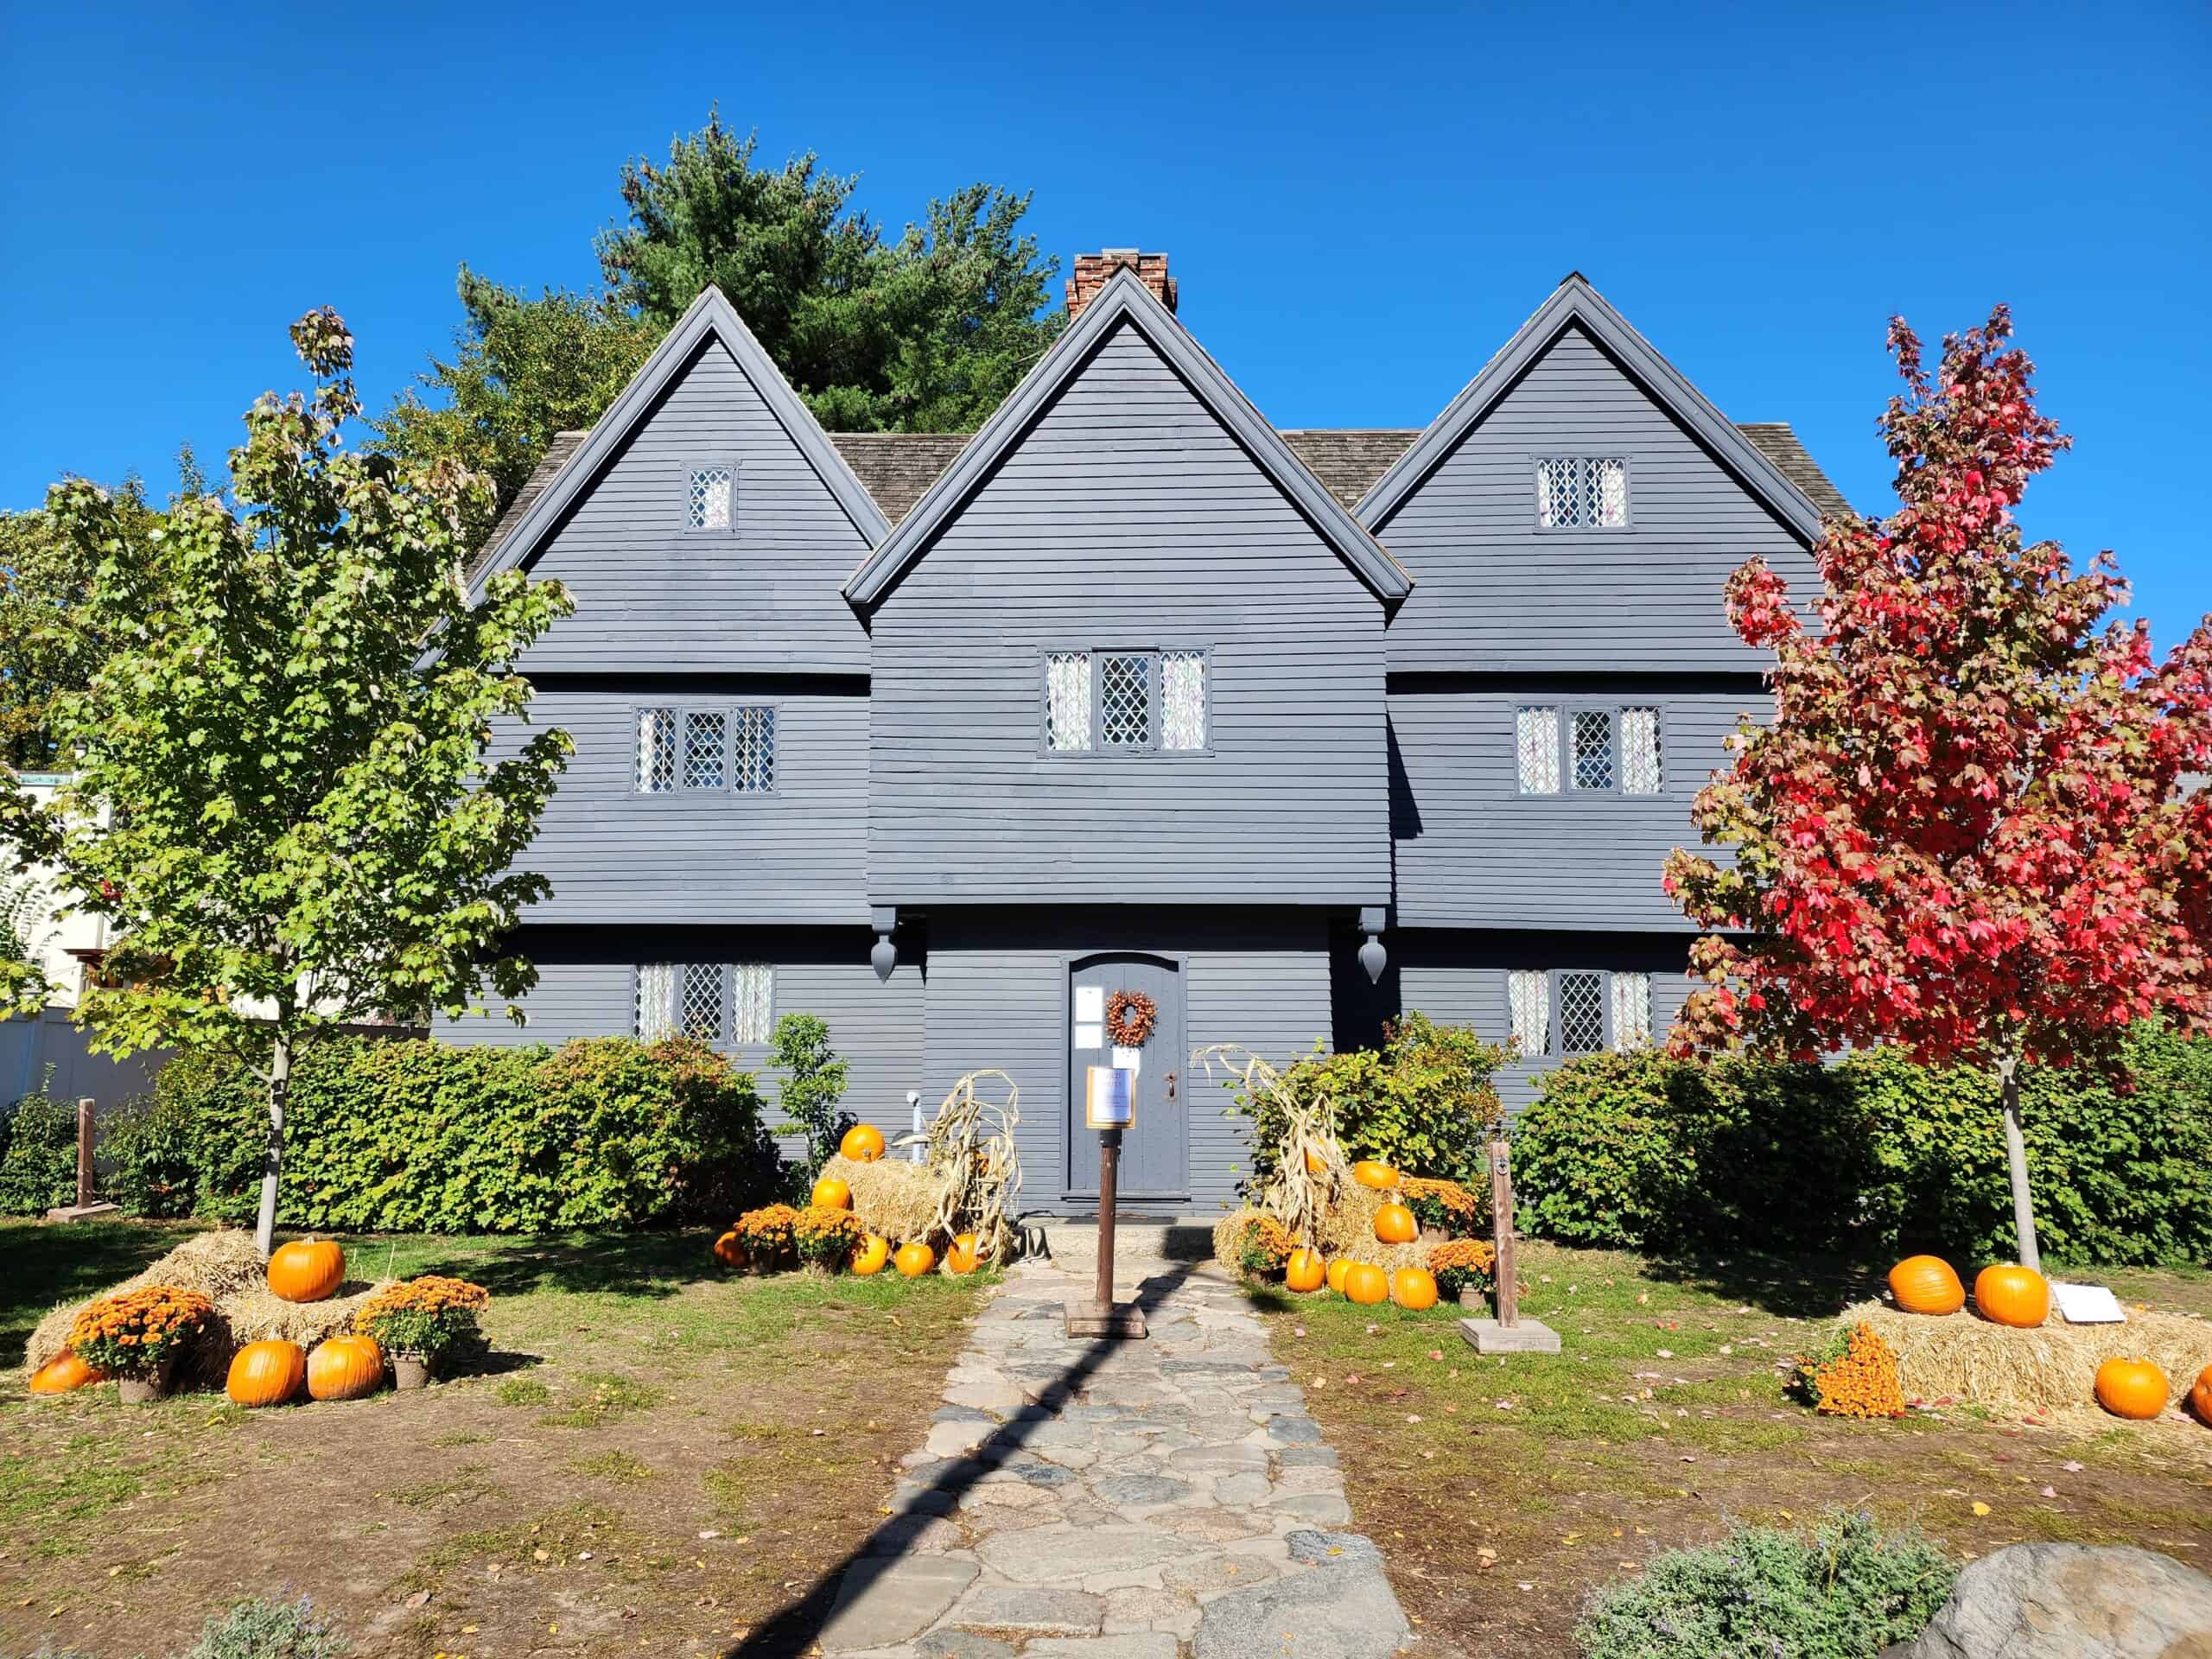 A historic dark wood-paneled house in New England, decorated with autumnal pumpkins and hay bales, captures the seasonal charm on a driving tour. The bright fall foliage provides a colorful contrast to the classic architecture, inviting visitors to explore the region's heritage